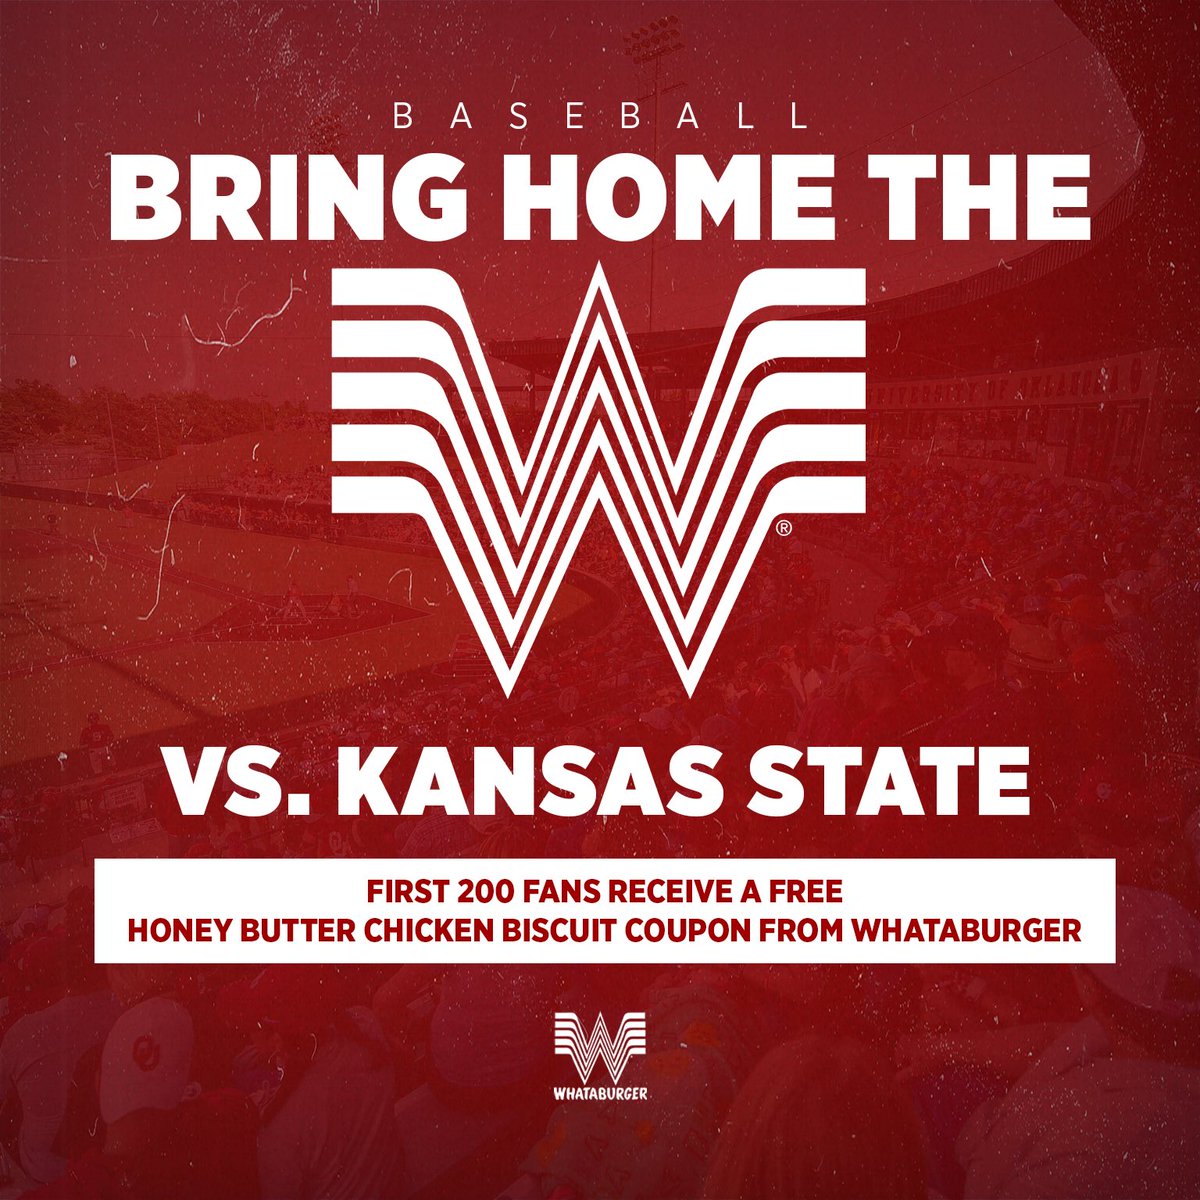 Reasons to show up early to @OU_Baseball ↙️ 🍔 @Whataburger coupons 🍺 Happy Hour (4:30pm - First Pitch) 🎉 ouath.at/BSB24Promos